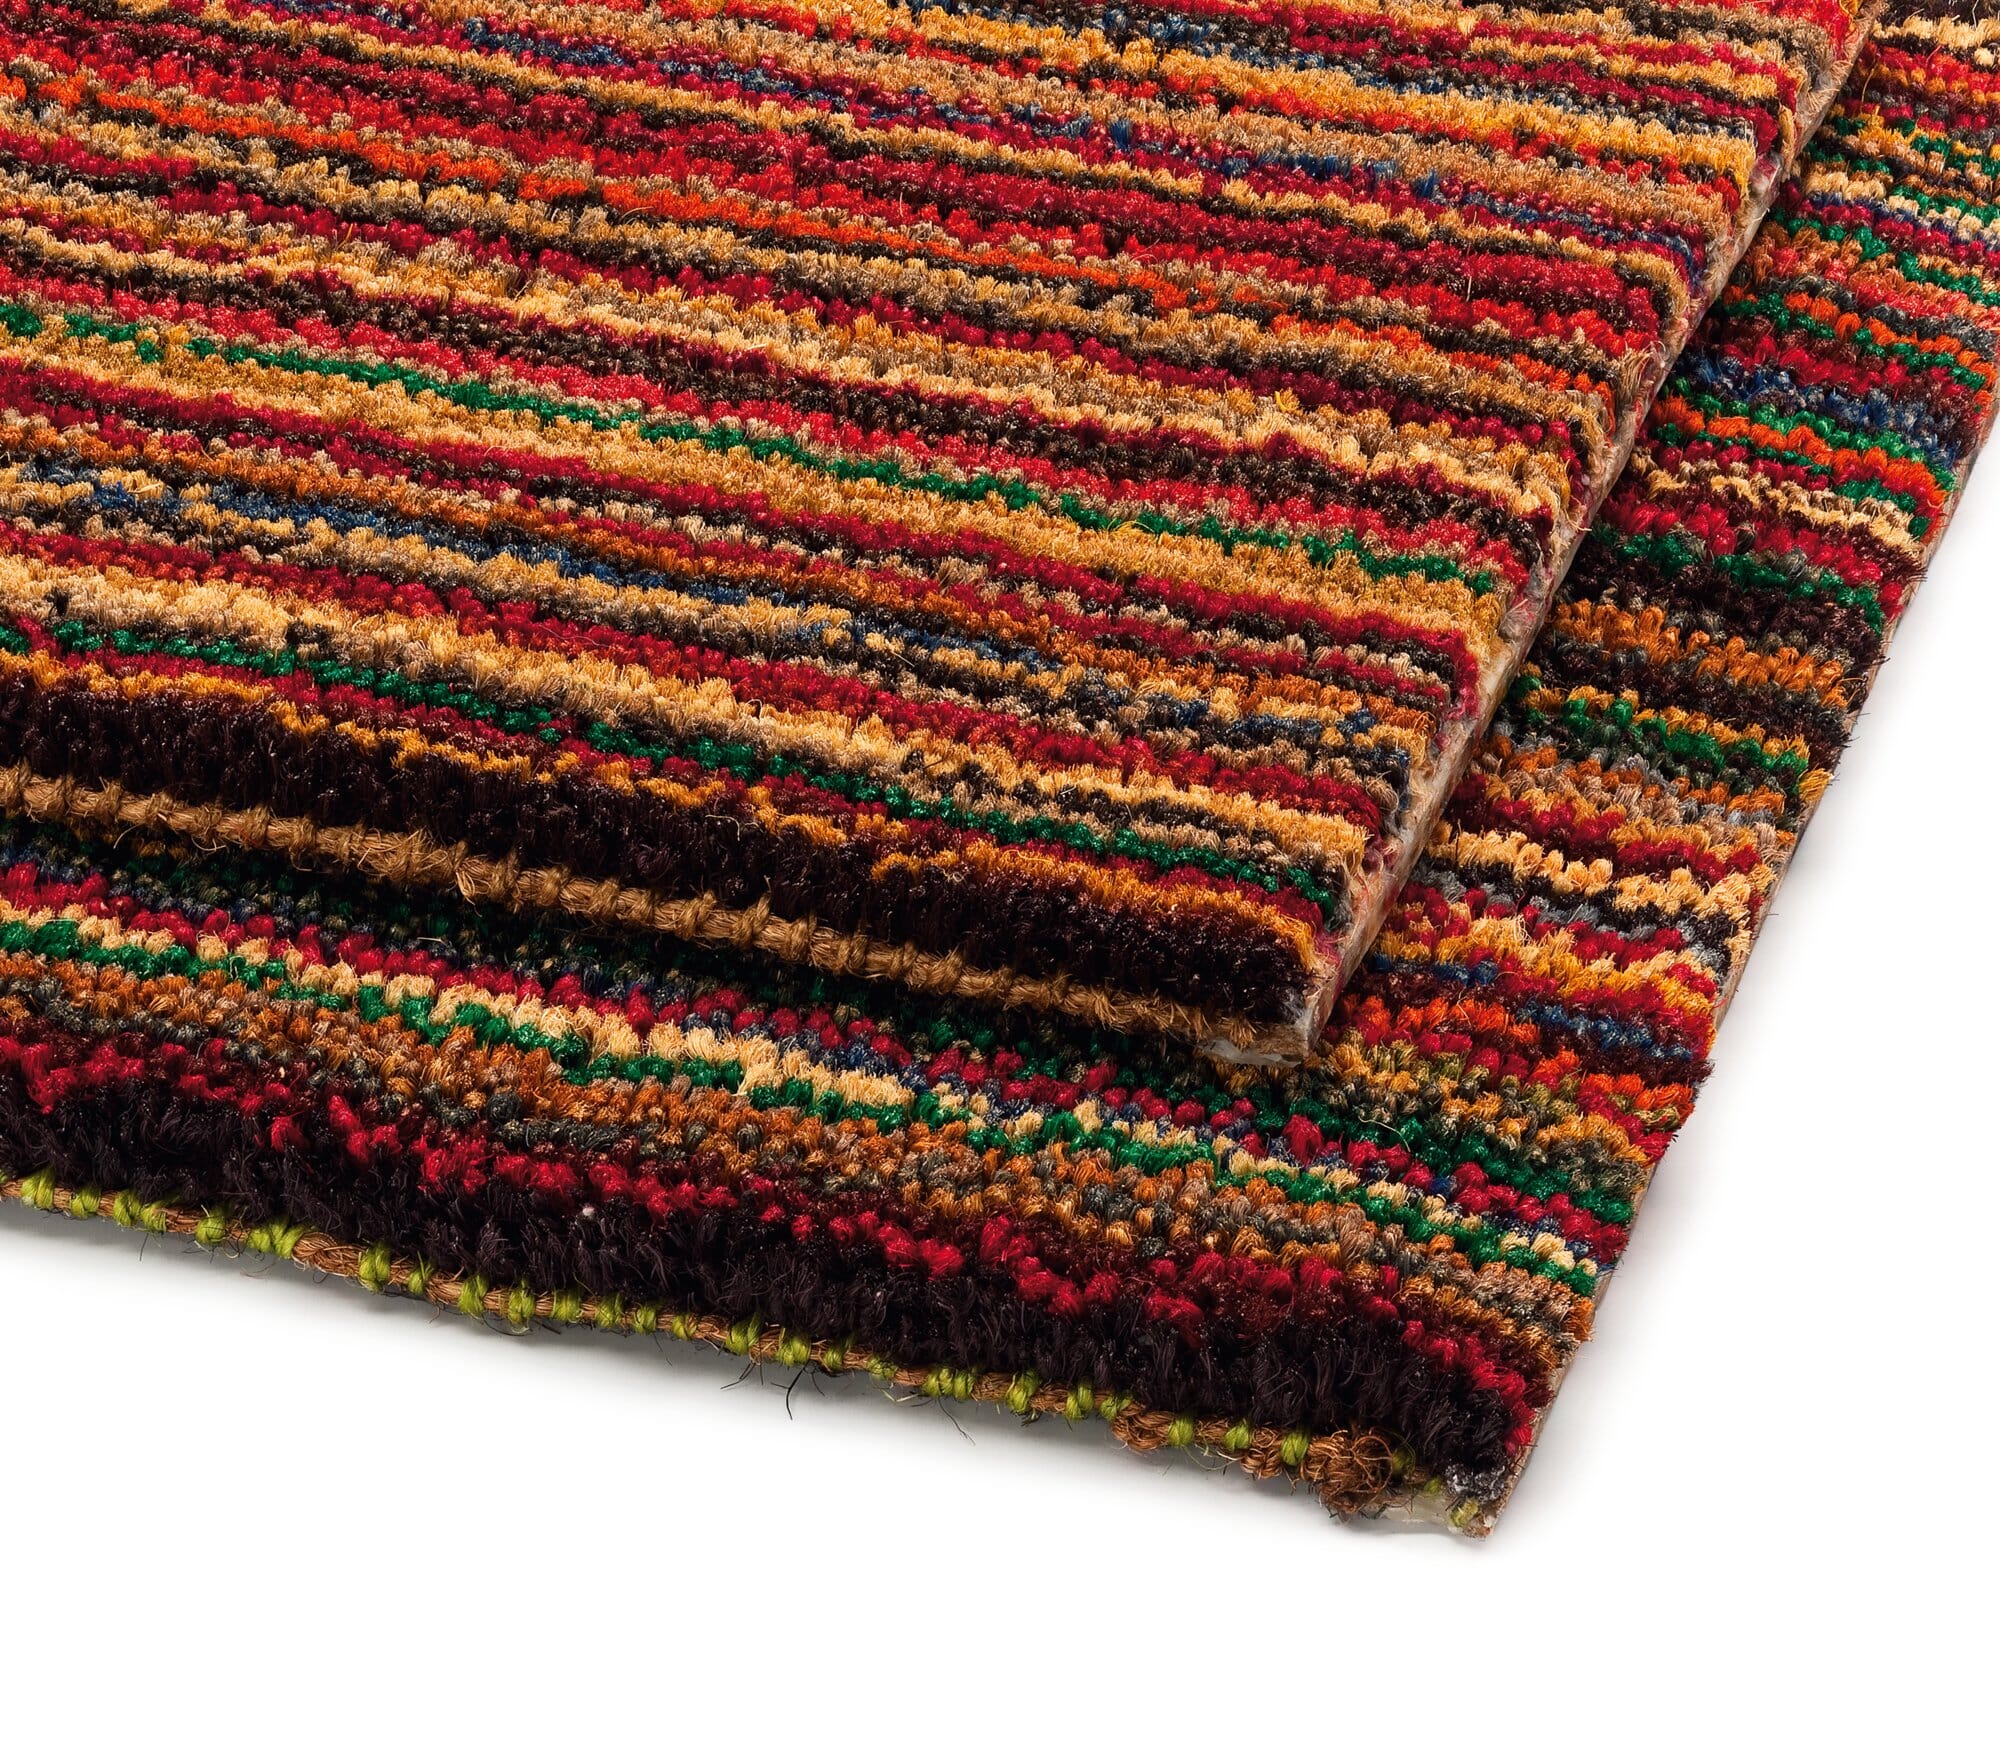 Large Coir Doormat - 25mm Thick